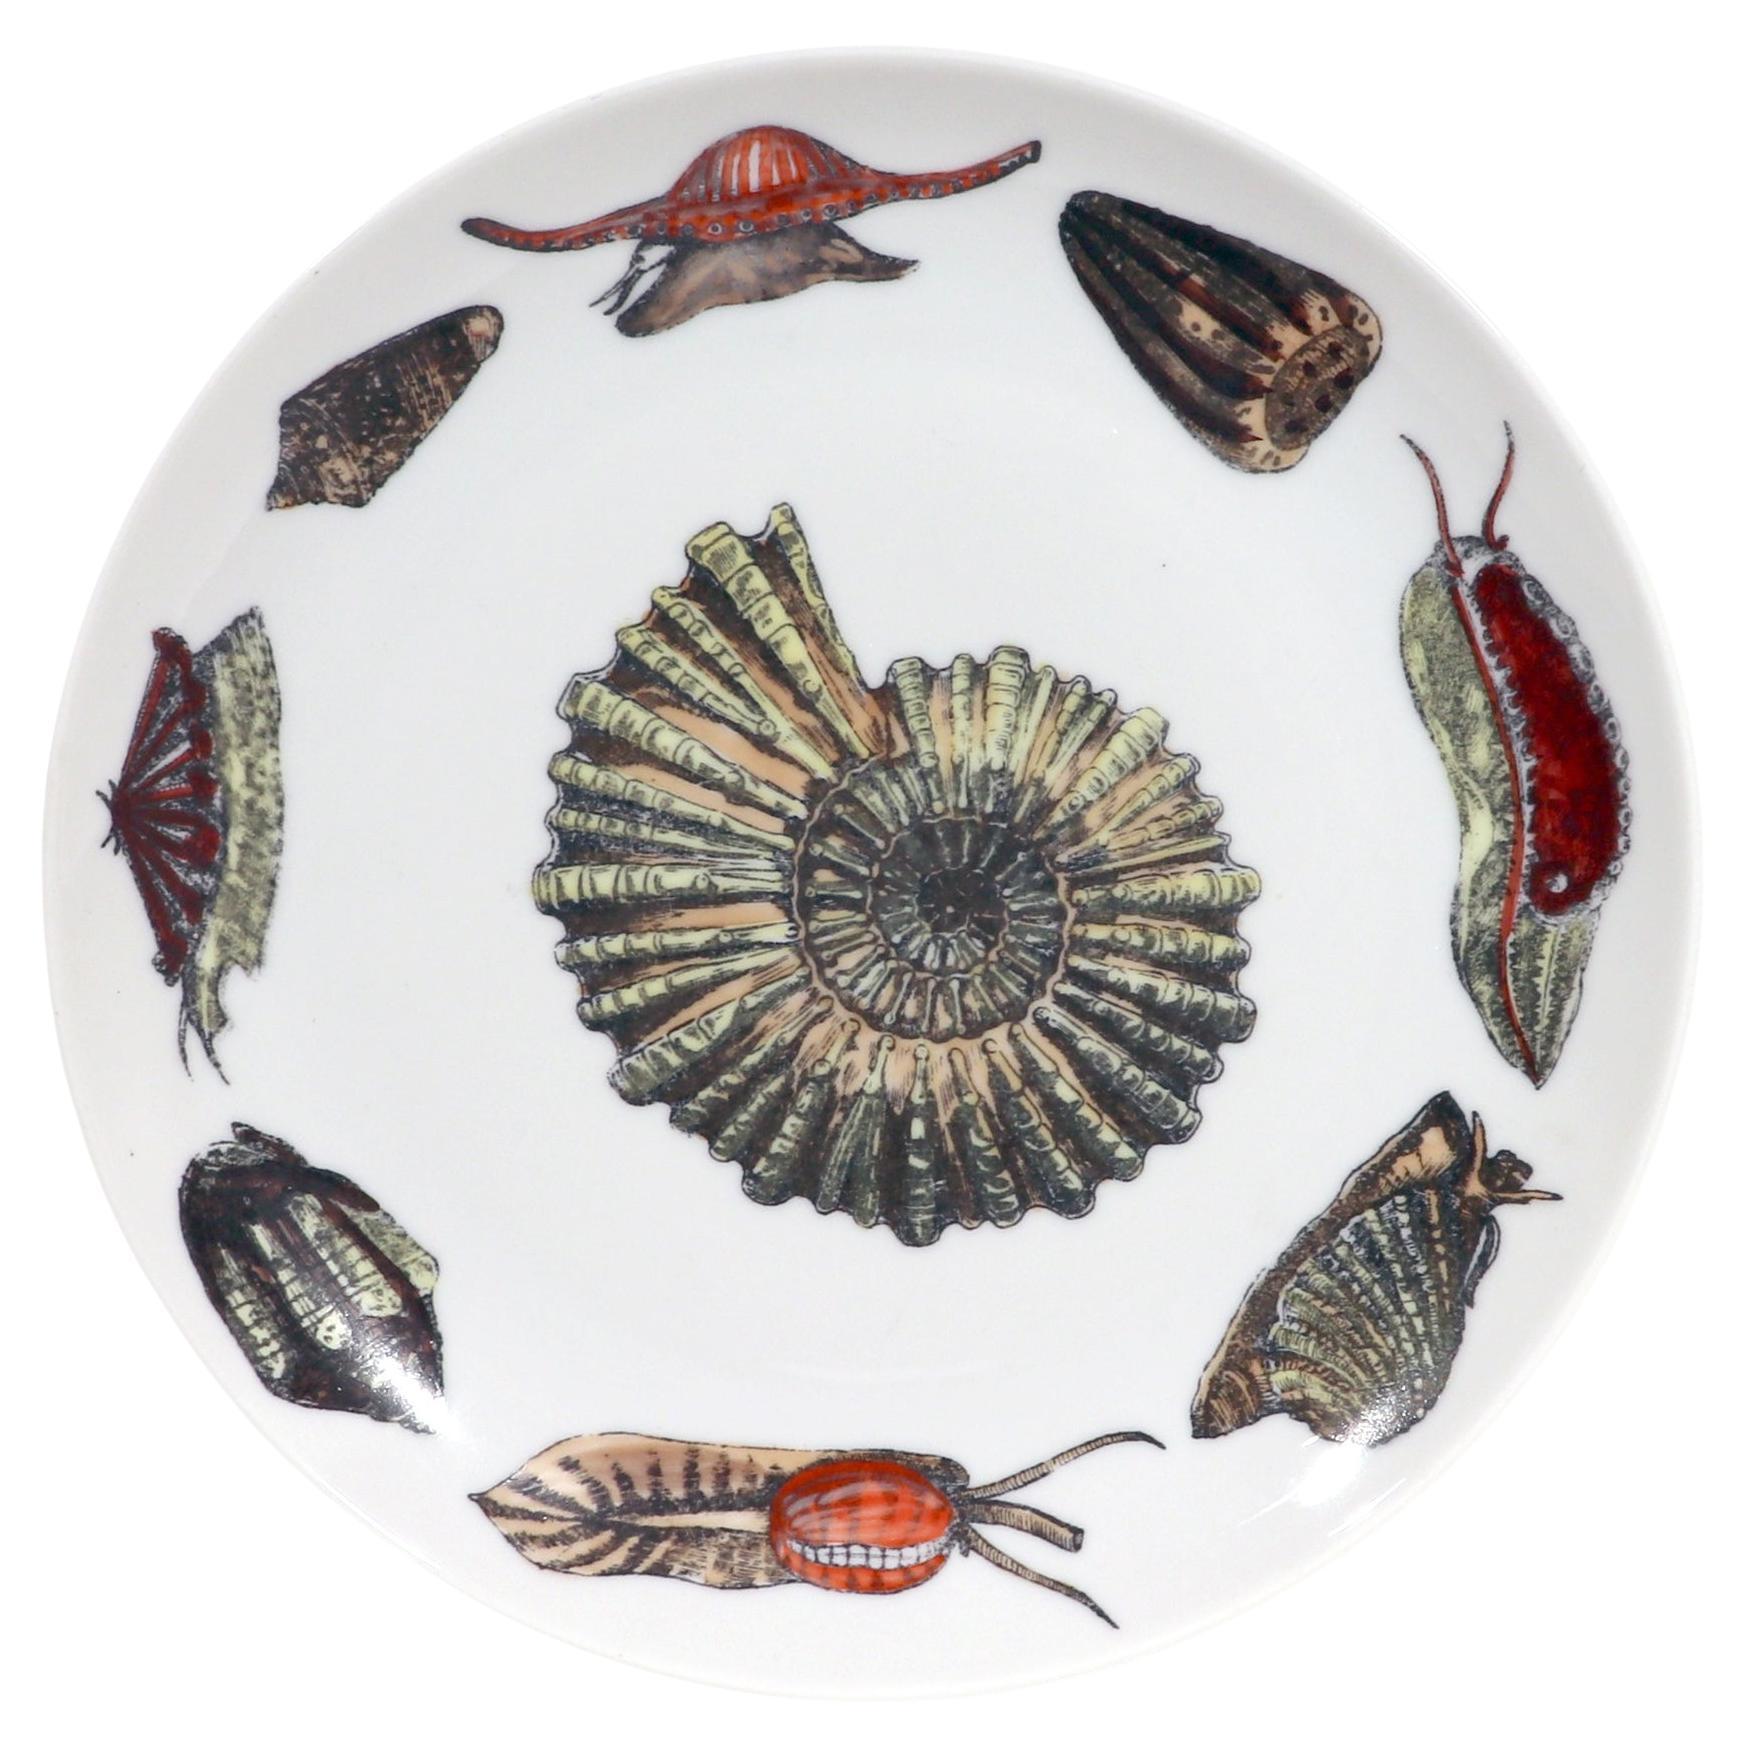 Piero Fornasetti Porcelain Conchiglie Seashell Plate With Snails and Mollusks For Sale